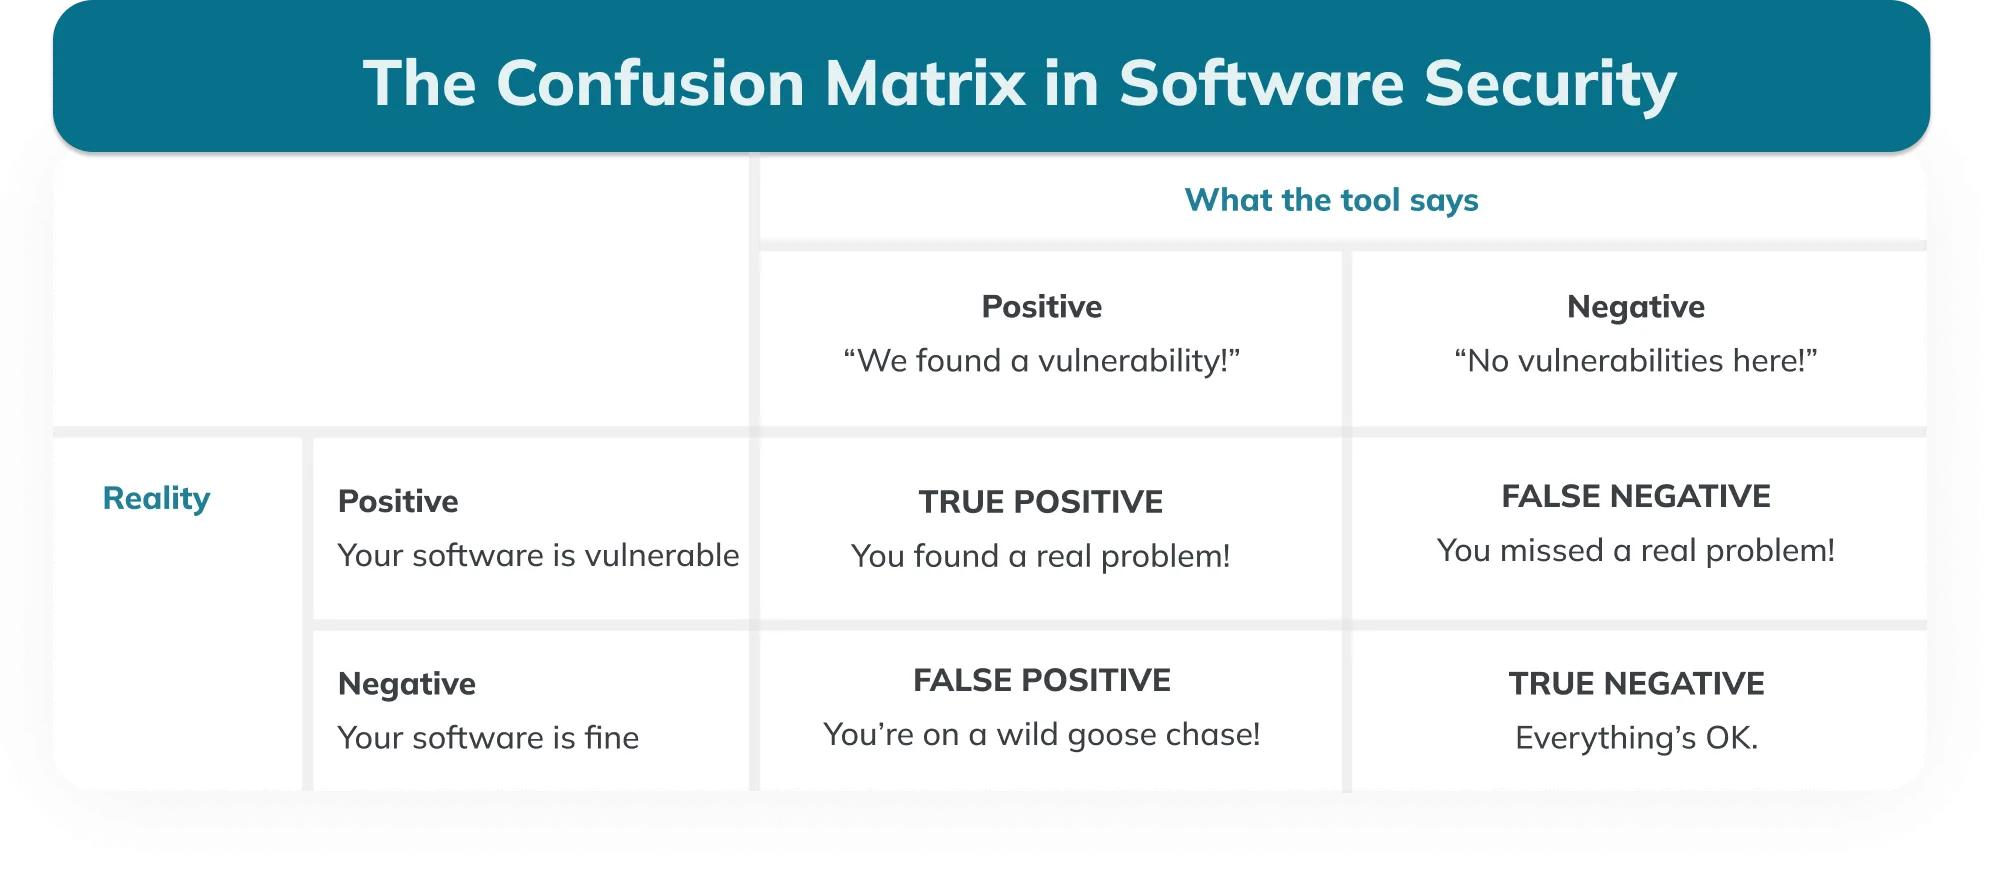 The Confusion Matrix in Software Security